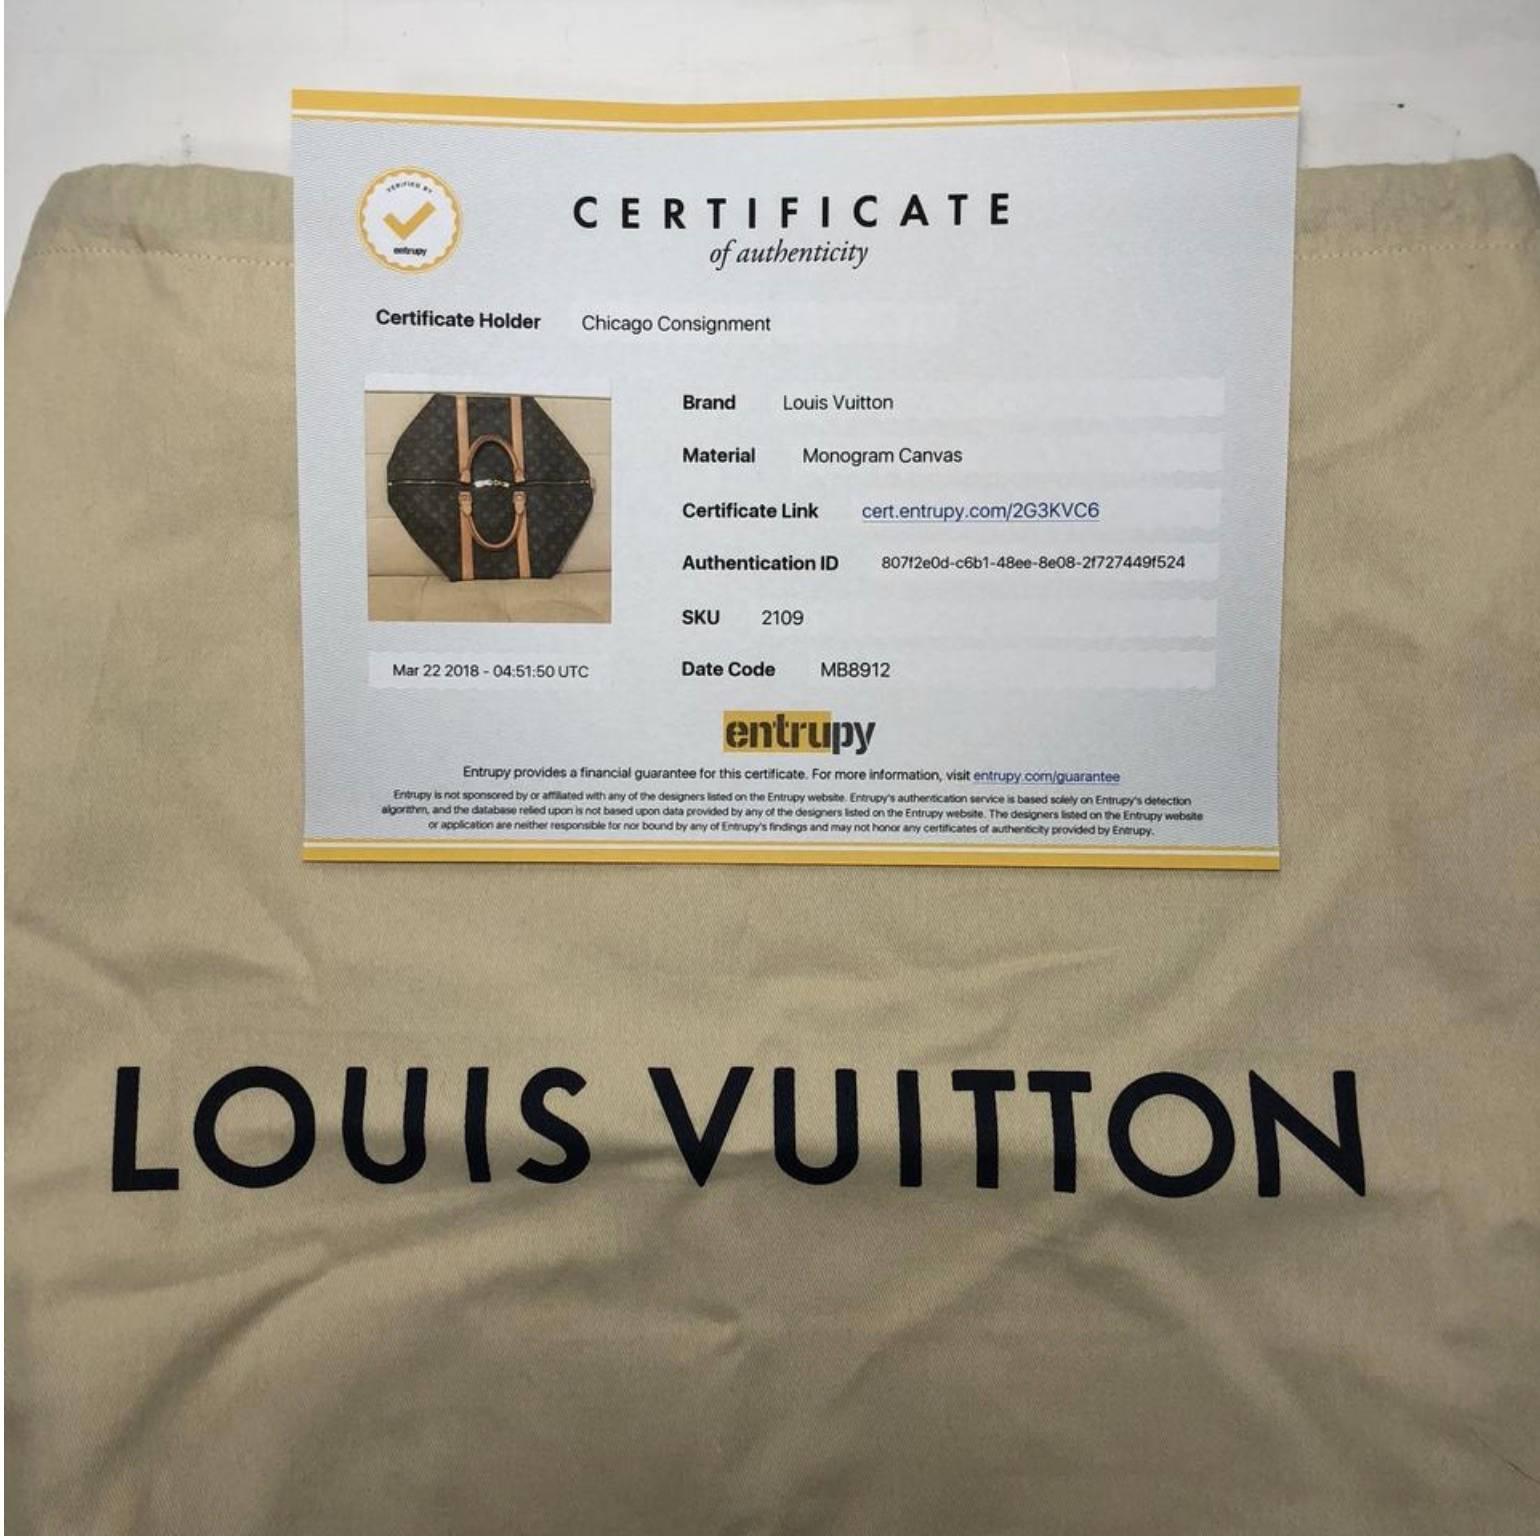 MODEL - Louis Vuitton Monogram Keepall 50

CONDITION - Very Good. Light to medium vachette with watermarking and scuffing, no dryness and no cracking. Bright and shiny hardware with no tarnishing or chipping. No rips, holes, tears, stains or odors.